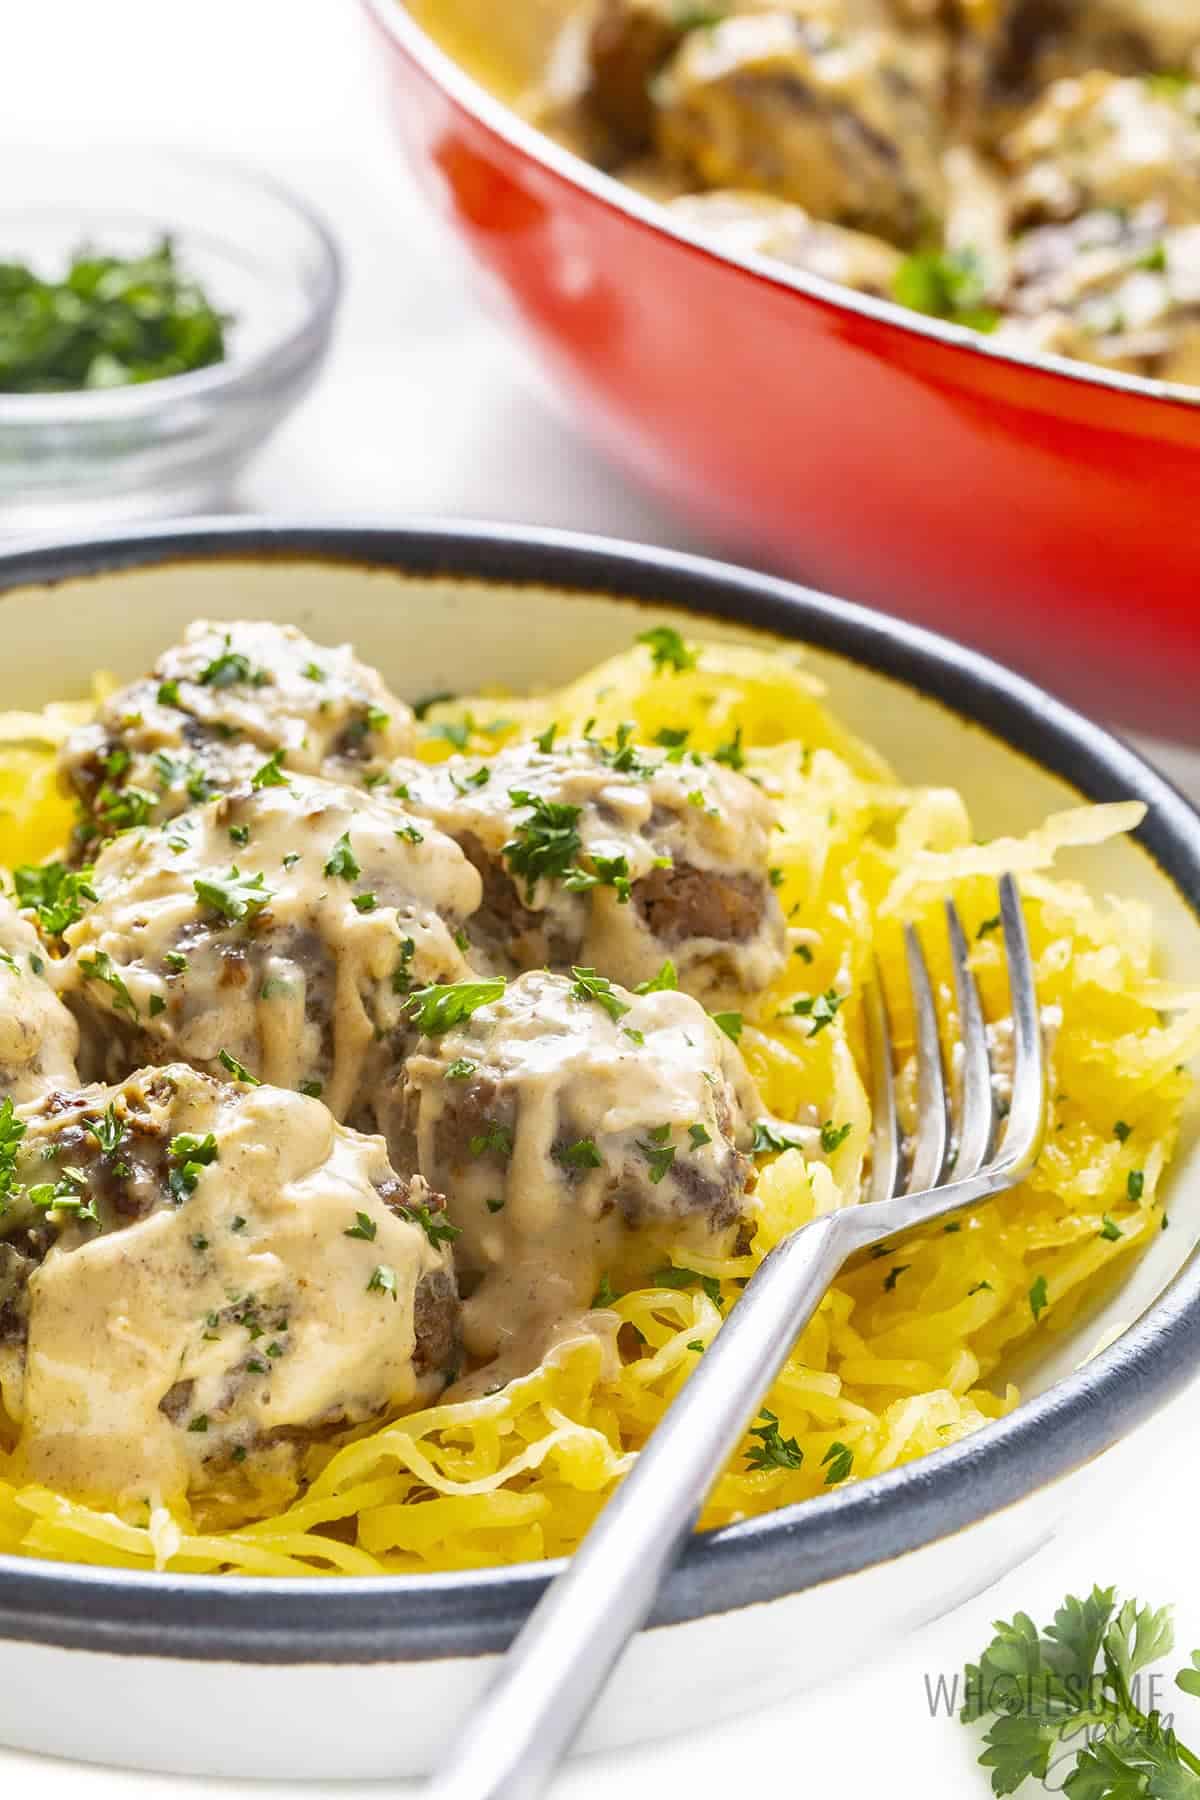 Plate of keto Swedish meatballs with braiser pan in background.